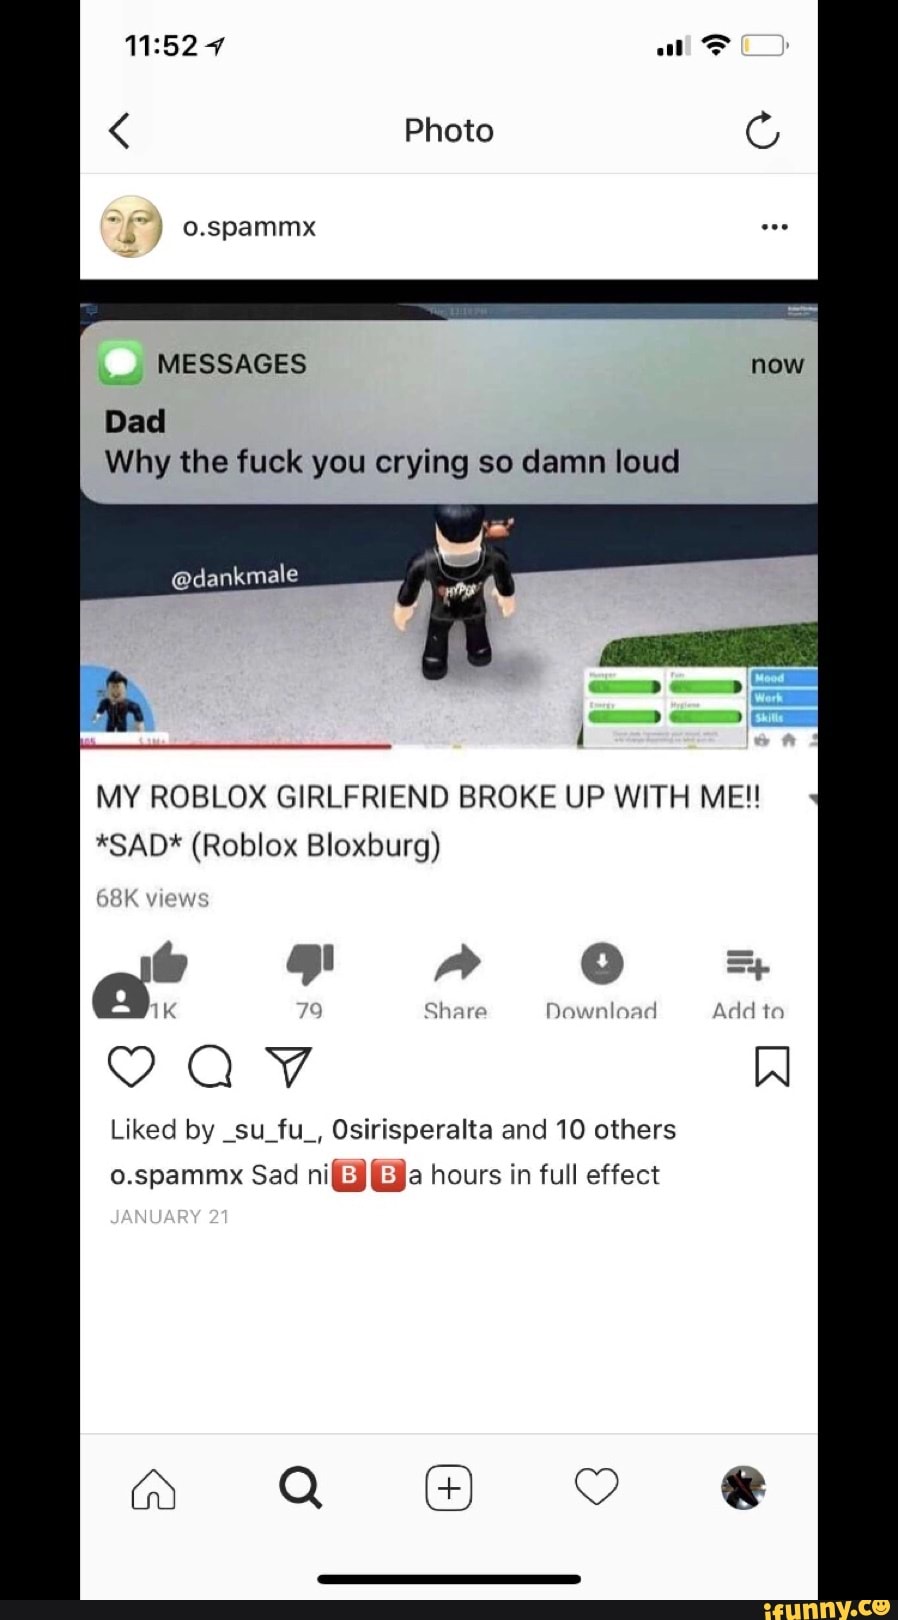 Why The Fuck You Crying So Damn Loud My Roblox Girlfriend Broke Up With Meu Sad Roblox Bloxburg Cgv Liked By Suifui Osirisperalta And 10 Others O Spamm Sad Nibua Hours In Full - my roblox girlfriend broke up with me sad roblox bloxburg